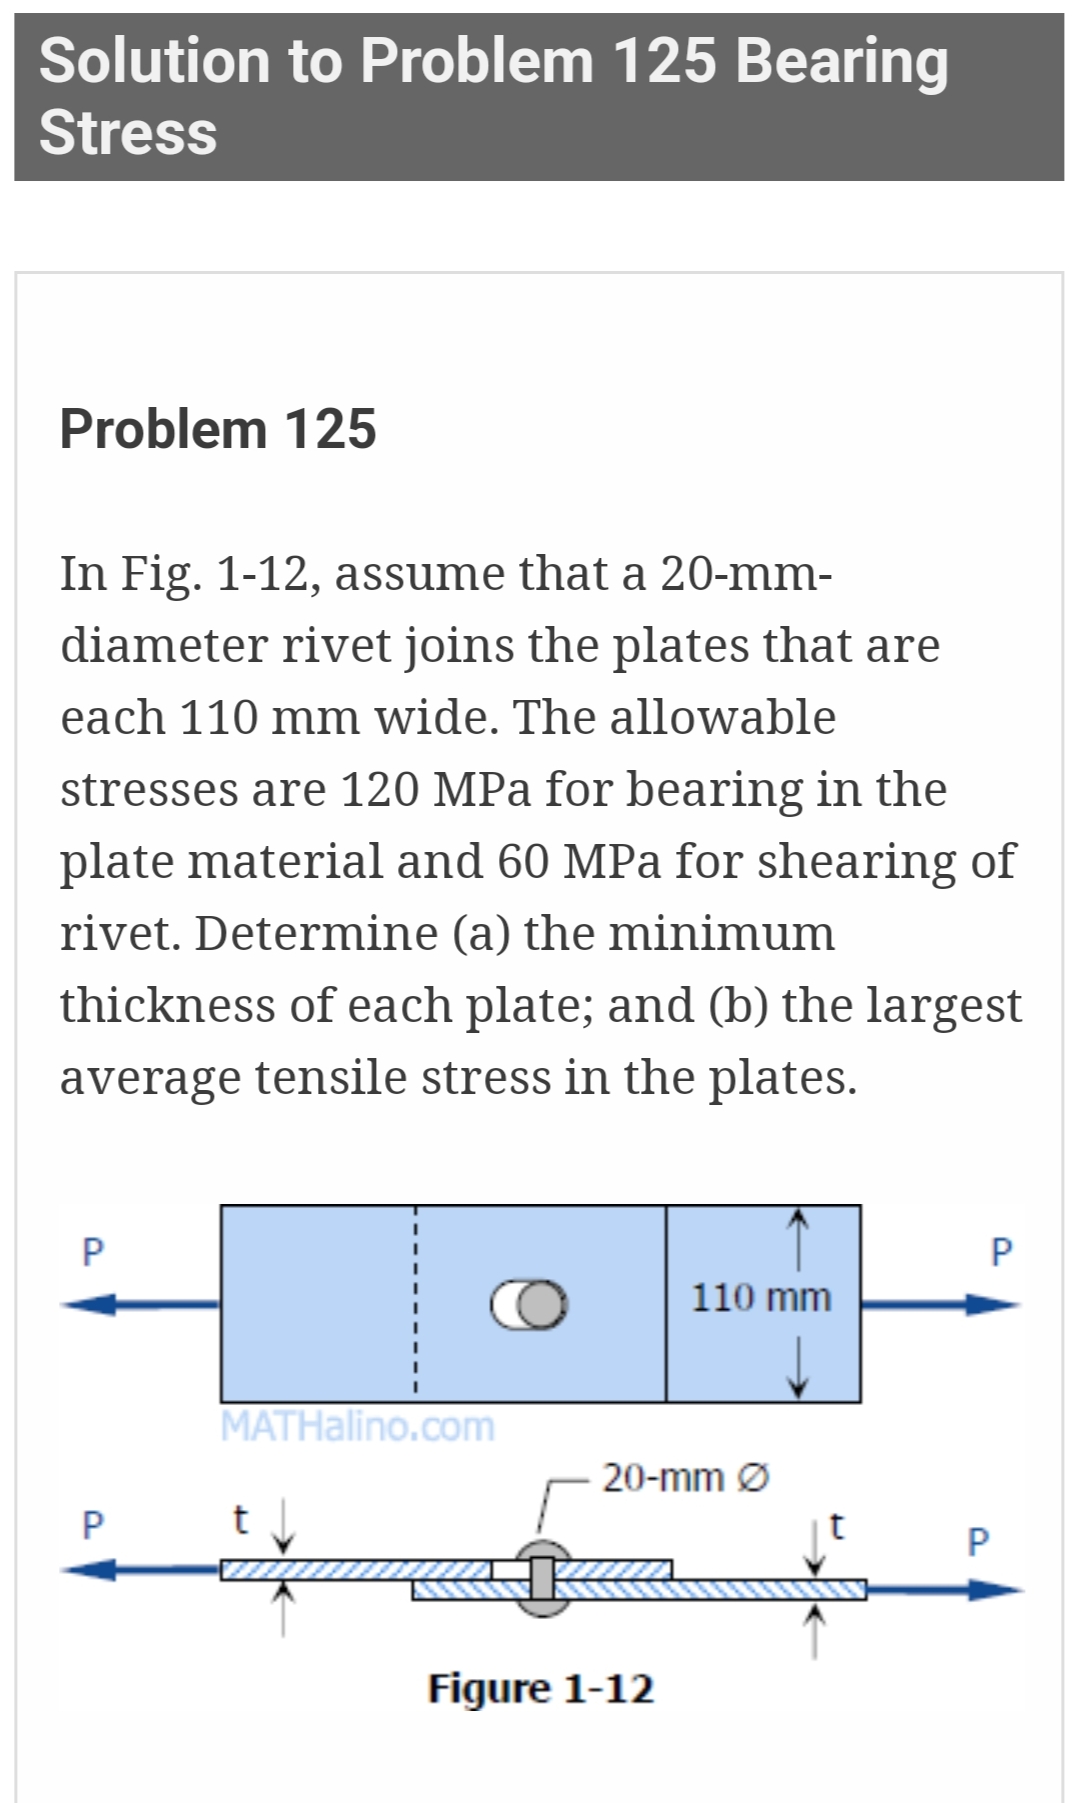 Solution to Problem 125 Bearing
Stress
Problem 125
In Fig. 1-12, assume that a 20-mm-
diameter rivet joins the plates that are
each 110 mm wide. The allowable
stresses are 120 MPa for bearing in the
plate material and 60 MPa for shearing of
rivet. Determine (a) the minimum
thickness of each plate; and (b) the largest
average tensile stress in the plates.
P
P
MATHalino.com
t
110 mm
20-mm Ø
Figure 1-12
t
P
P